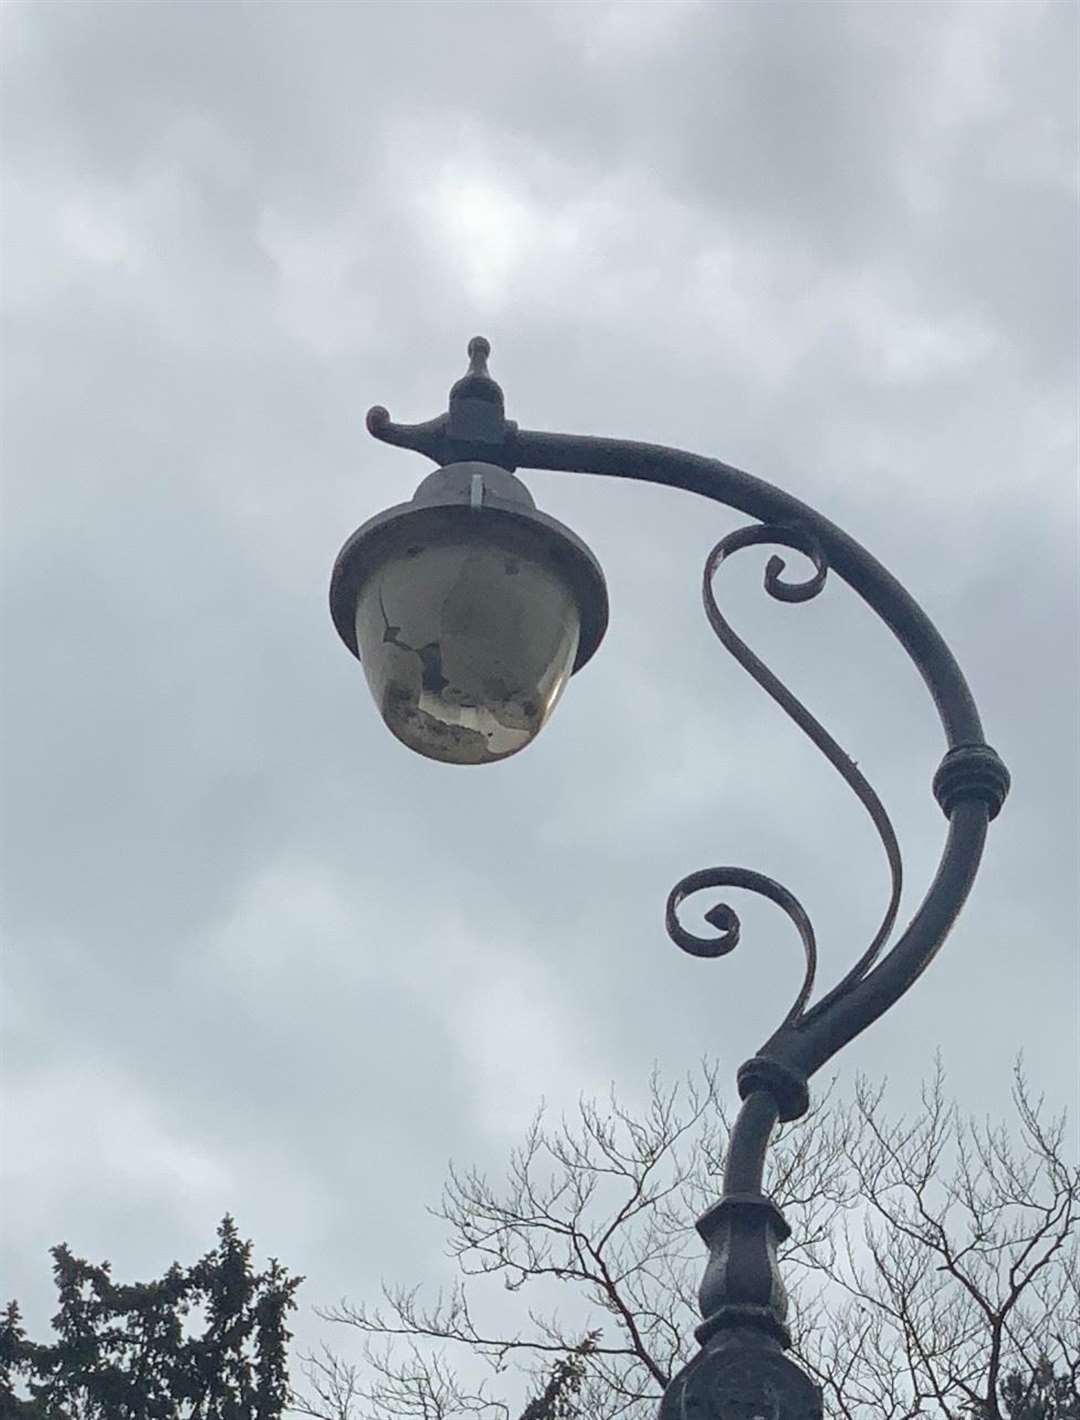 A street light was damaged by catapults in Cranbrook. Picture: Cranbrook and Sissinghurst Parish Council (49428326)